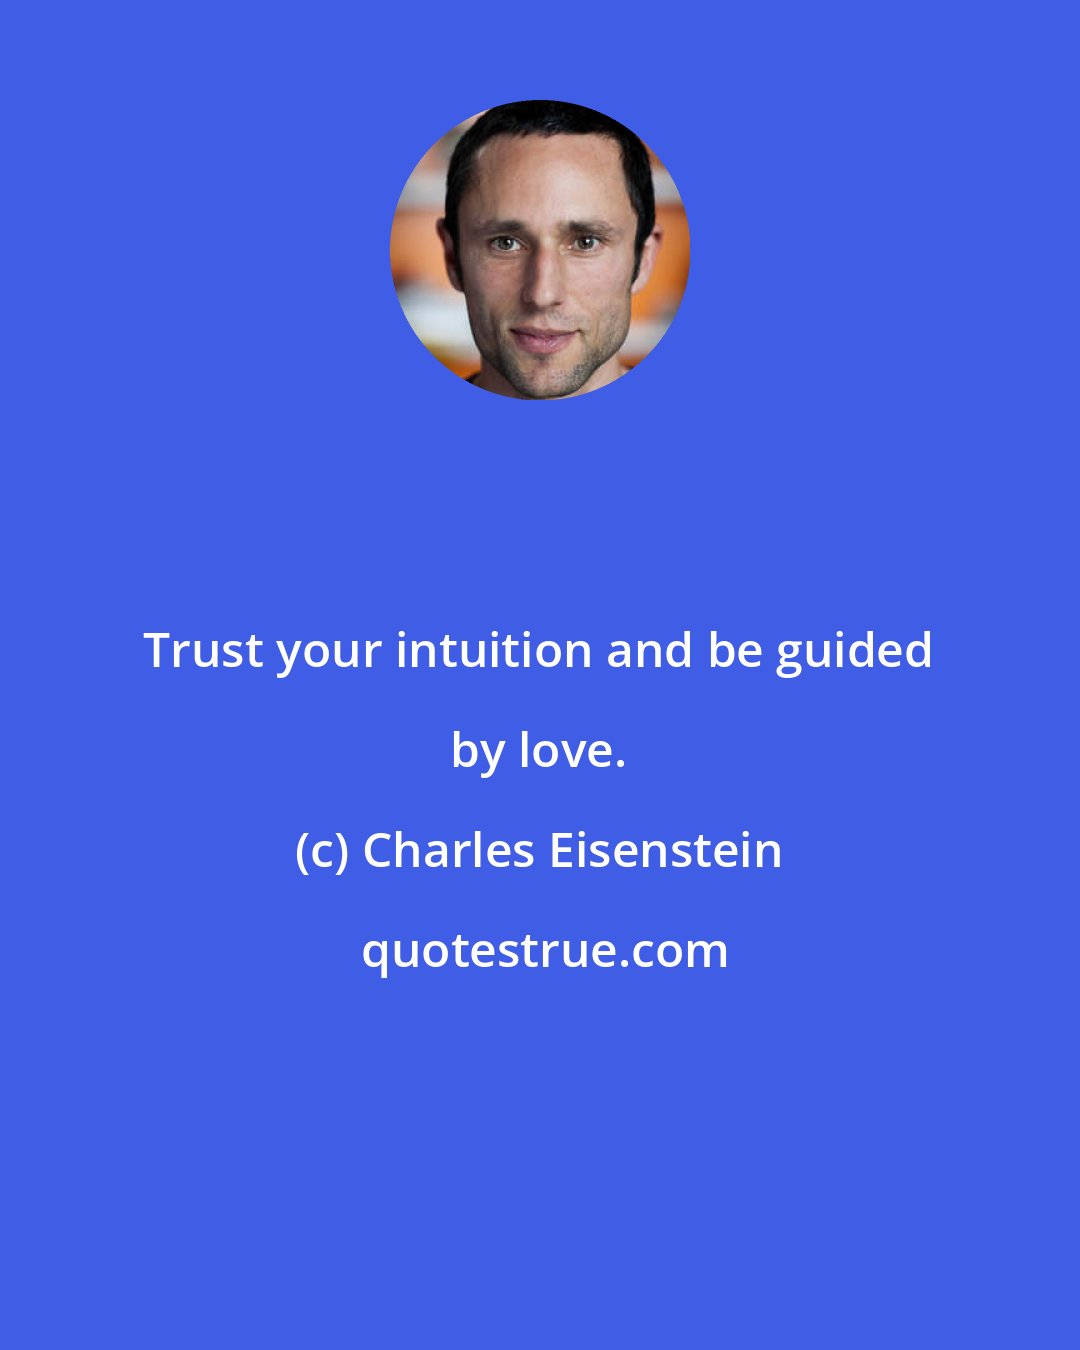 Charles Eisenstein: Trust your intuition and be guided by love.